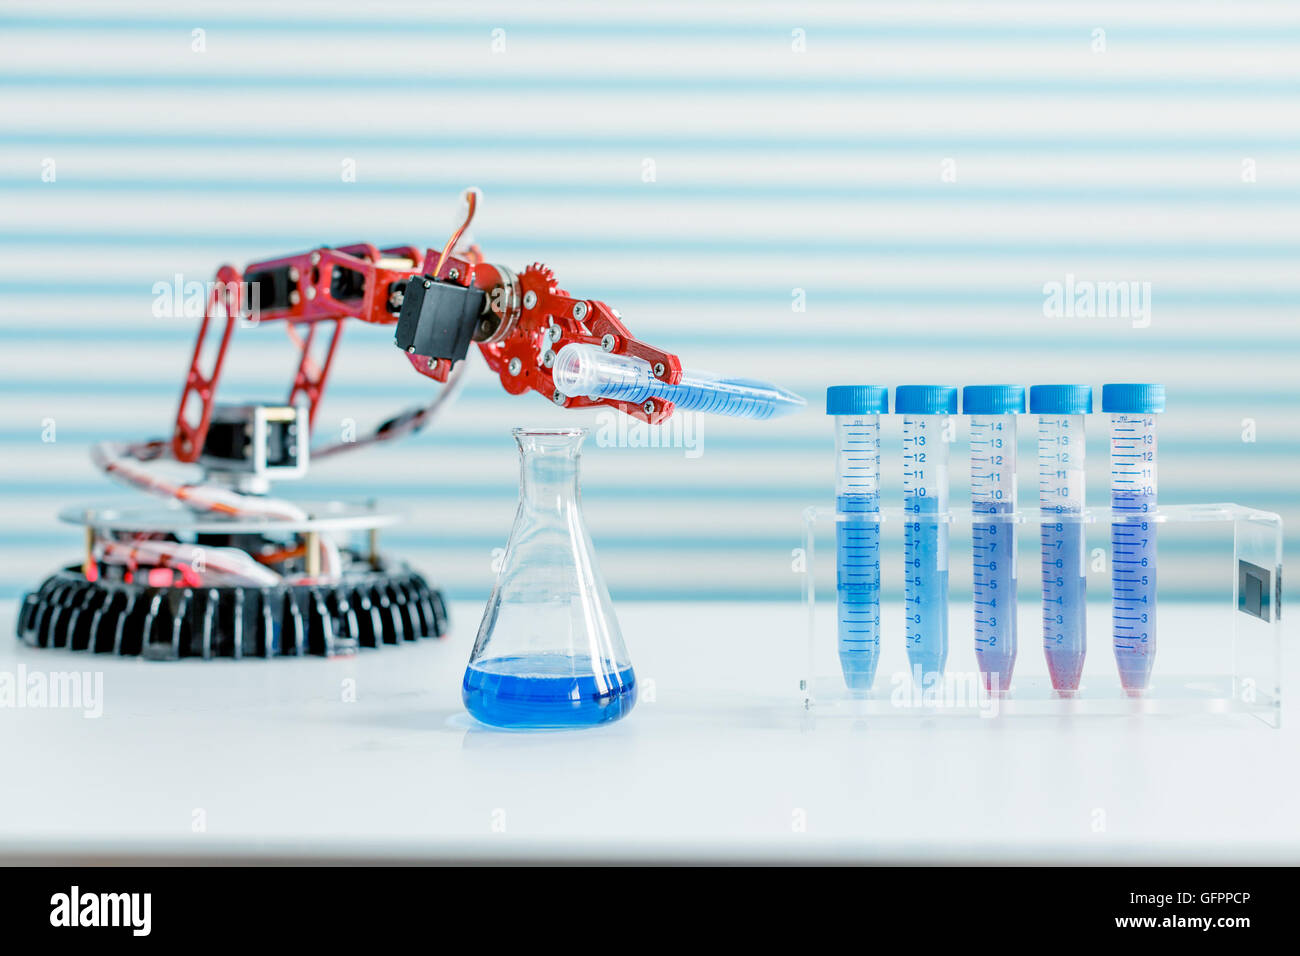 robot manipulates test tubes with dangerous chemicals Stock Photo